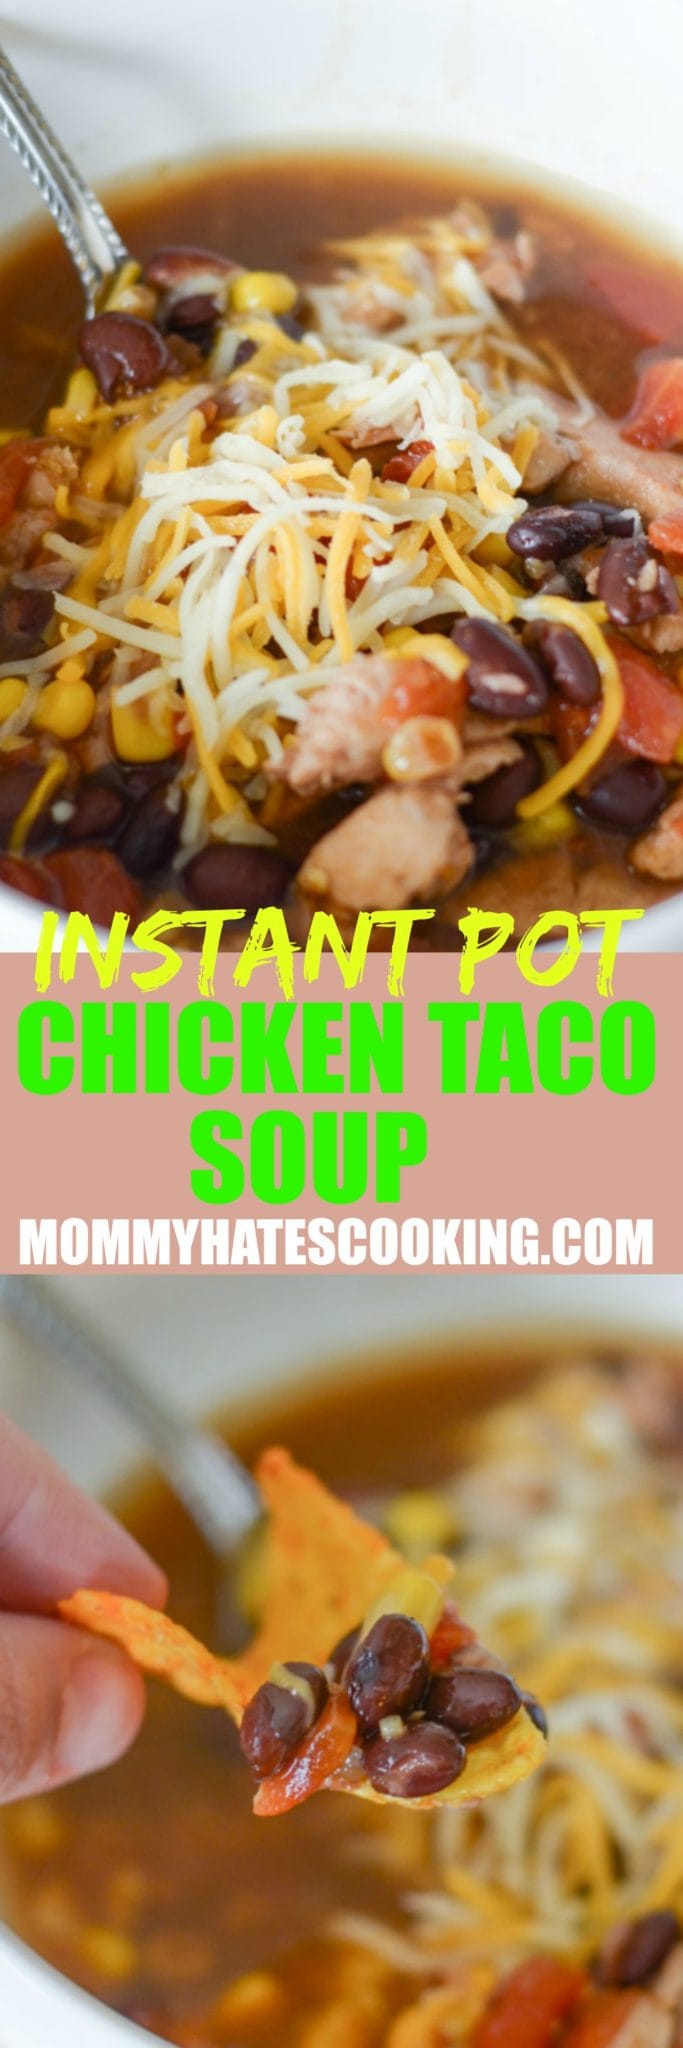 Instant Pot Chicken Taco Soup - Mommy Hates Cooking